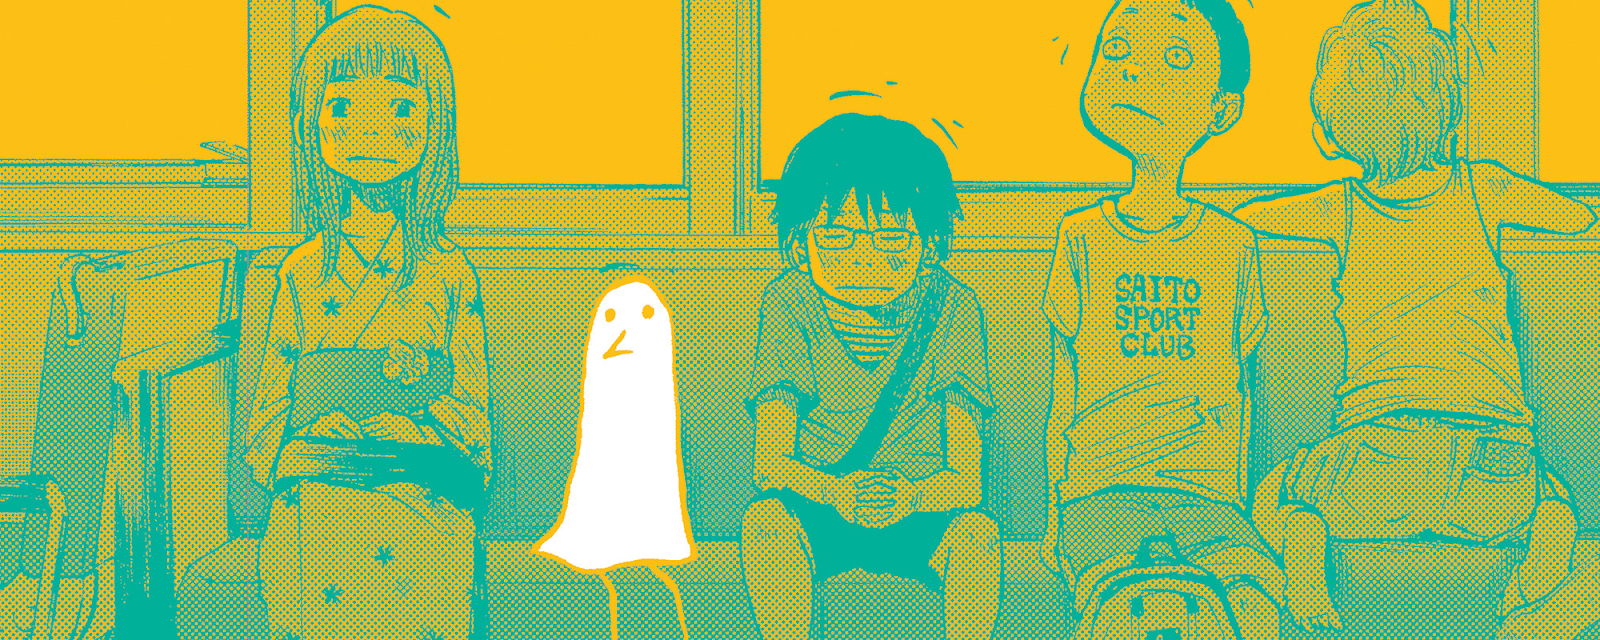 Yet, Punpun's chapters aren’t all depressed